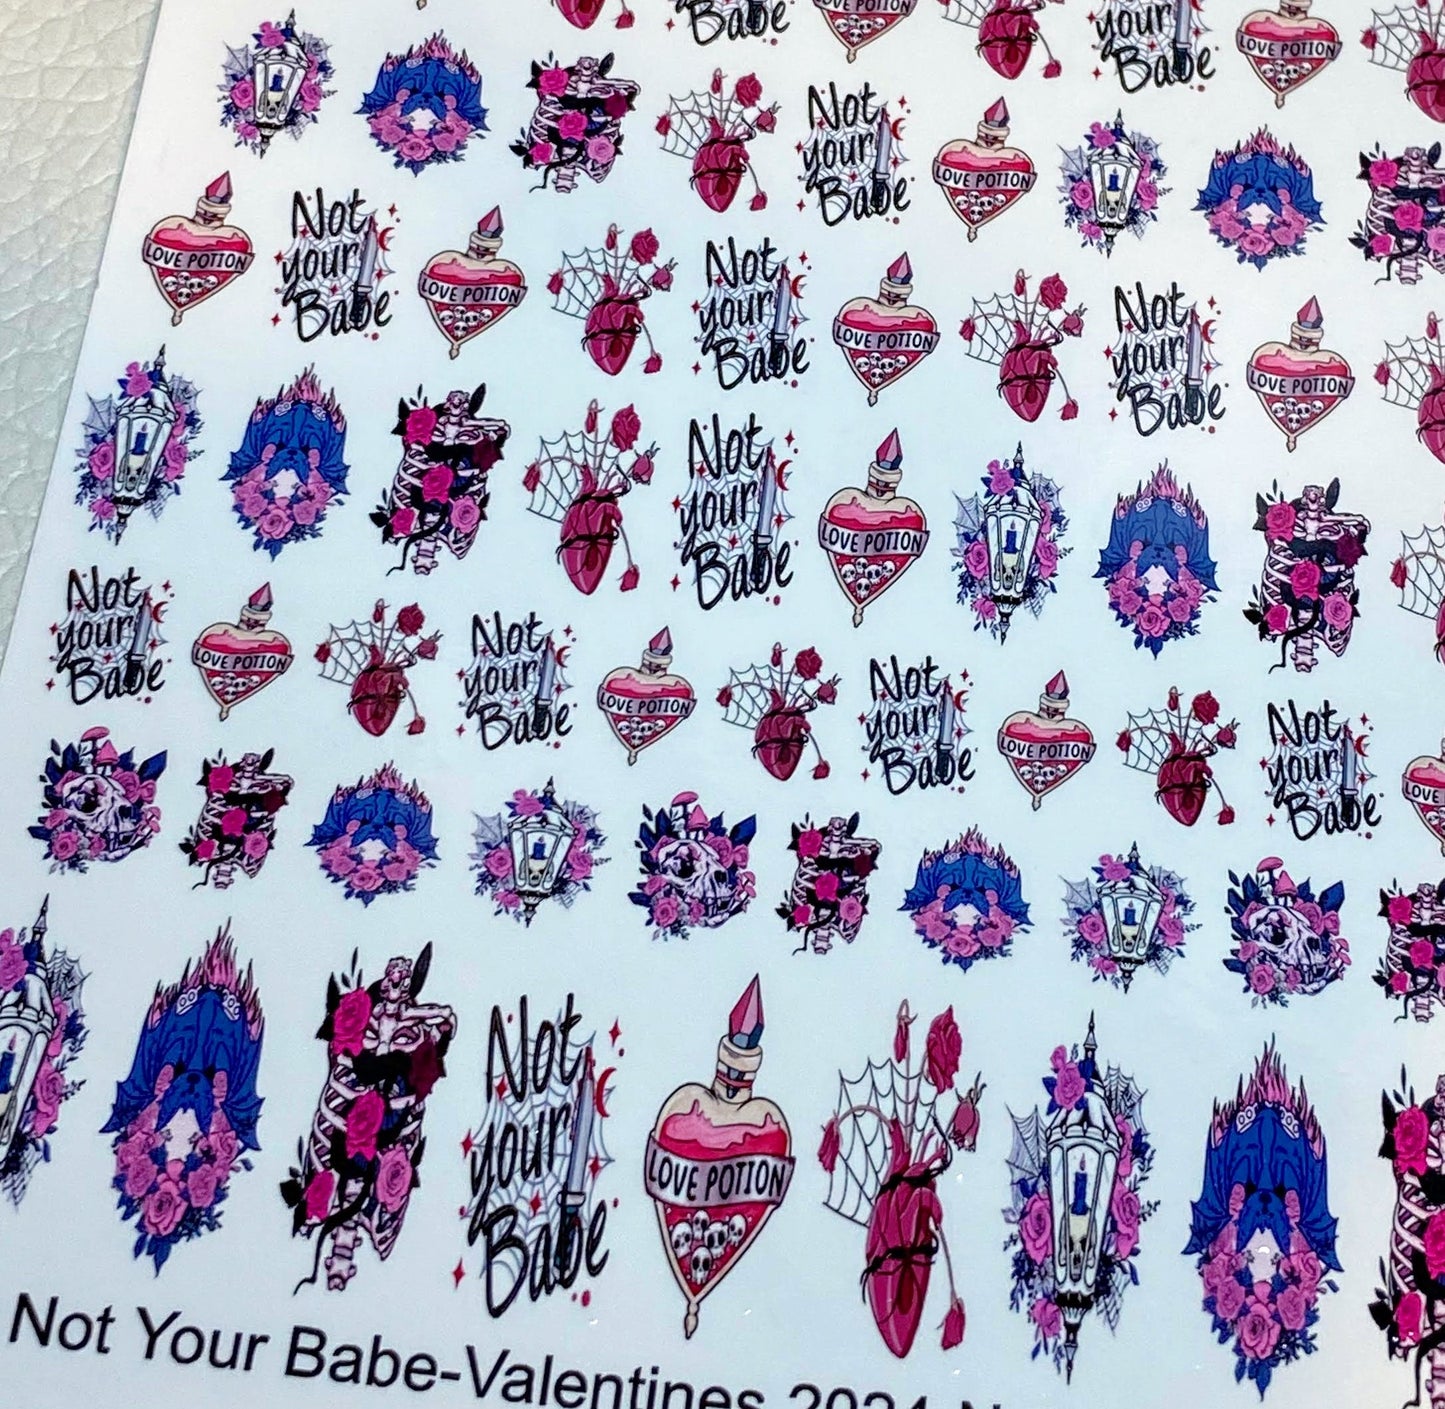 Valentines Day Nail Art - Not Your Babe